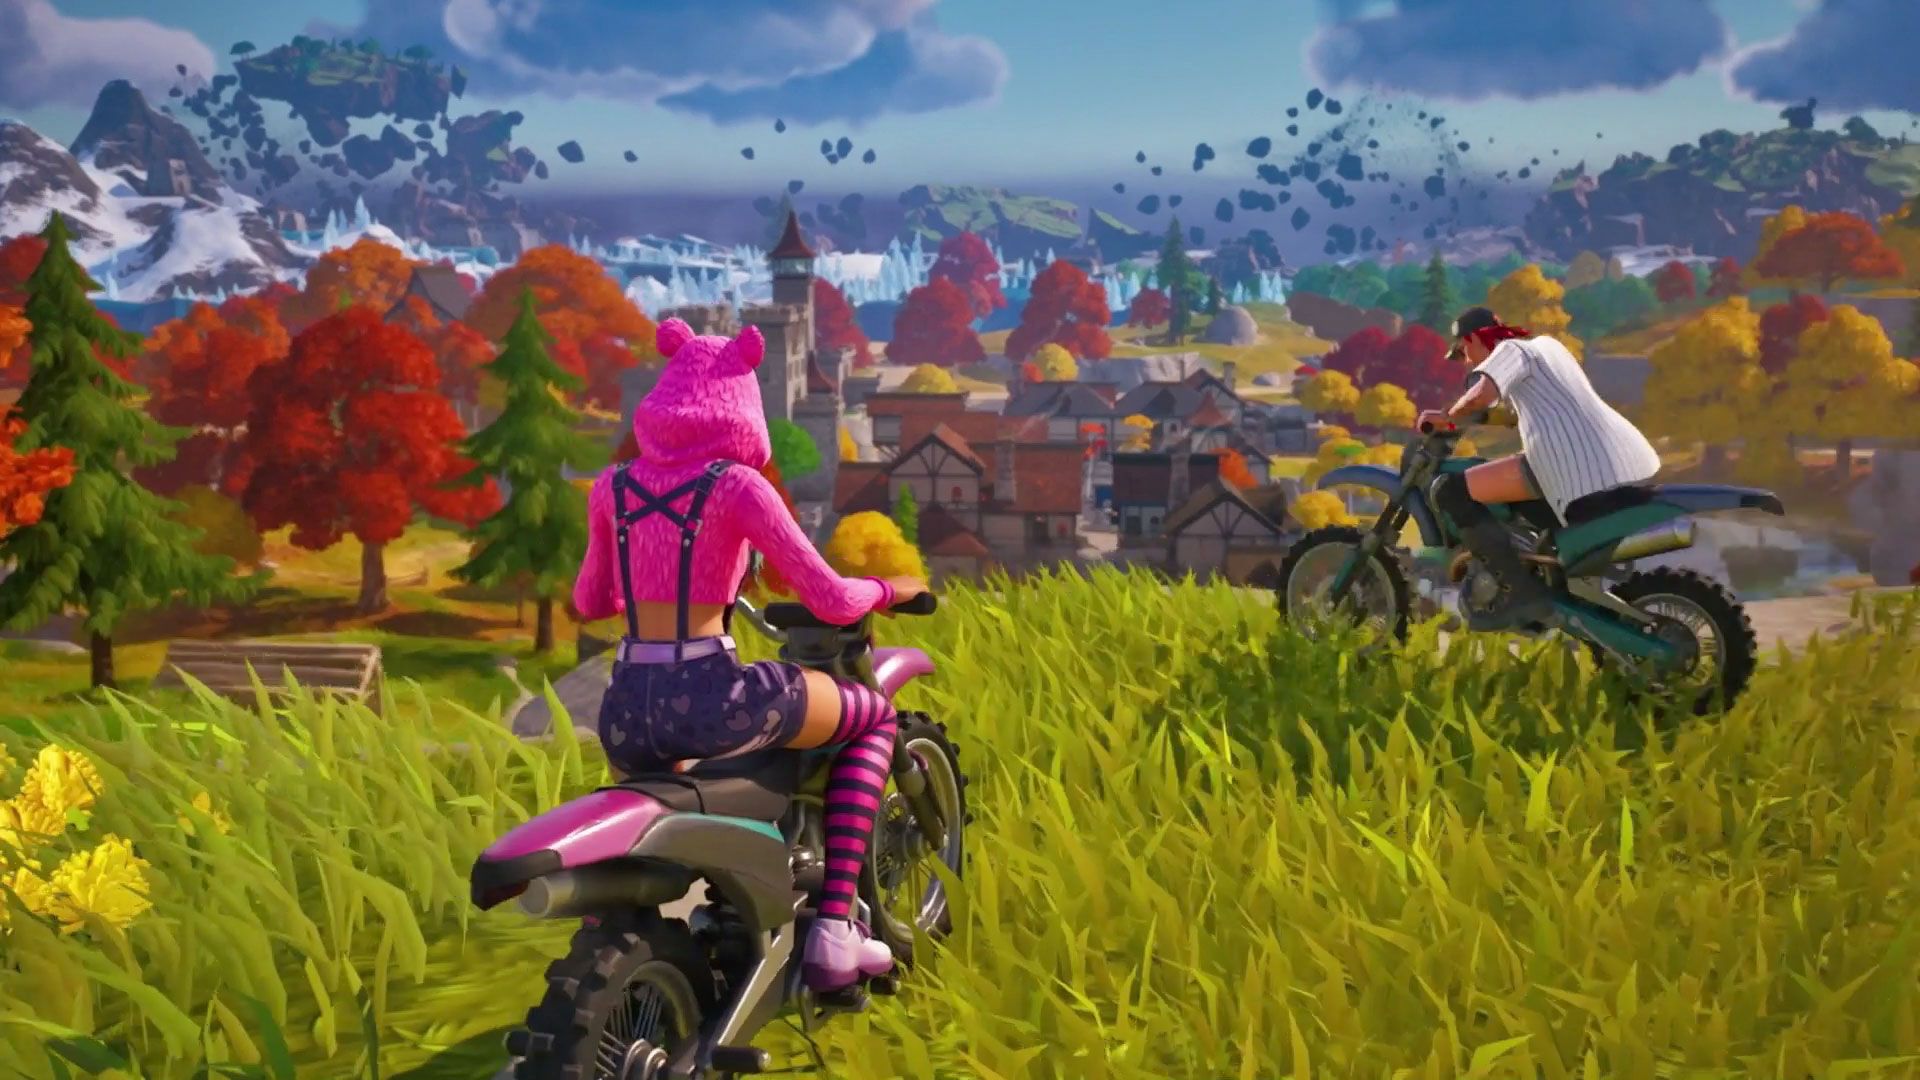 Fortnite classaction lawsuit can proceed, says Canadian court